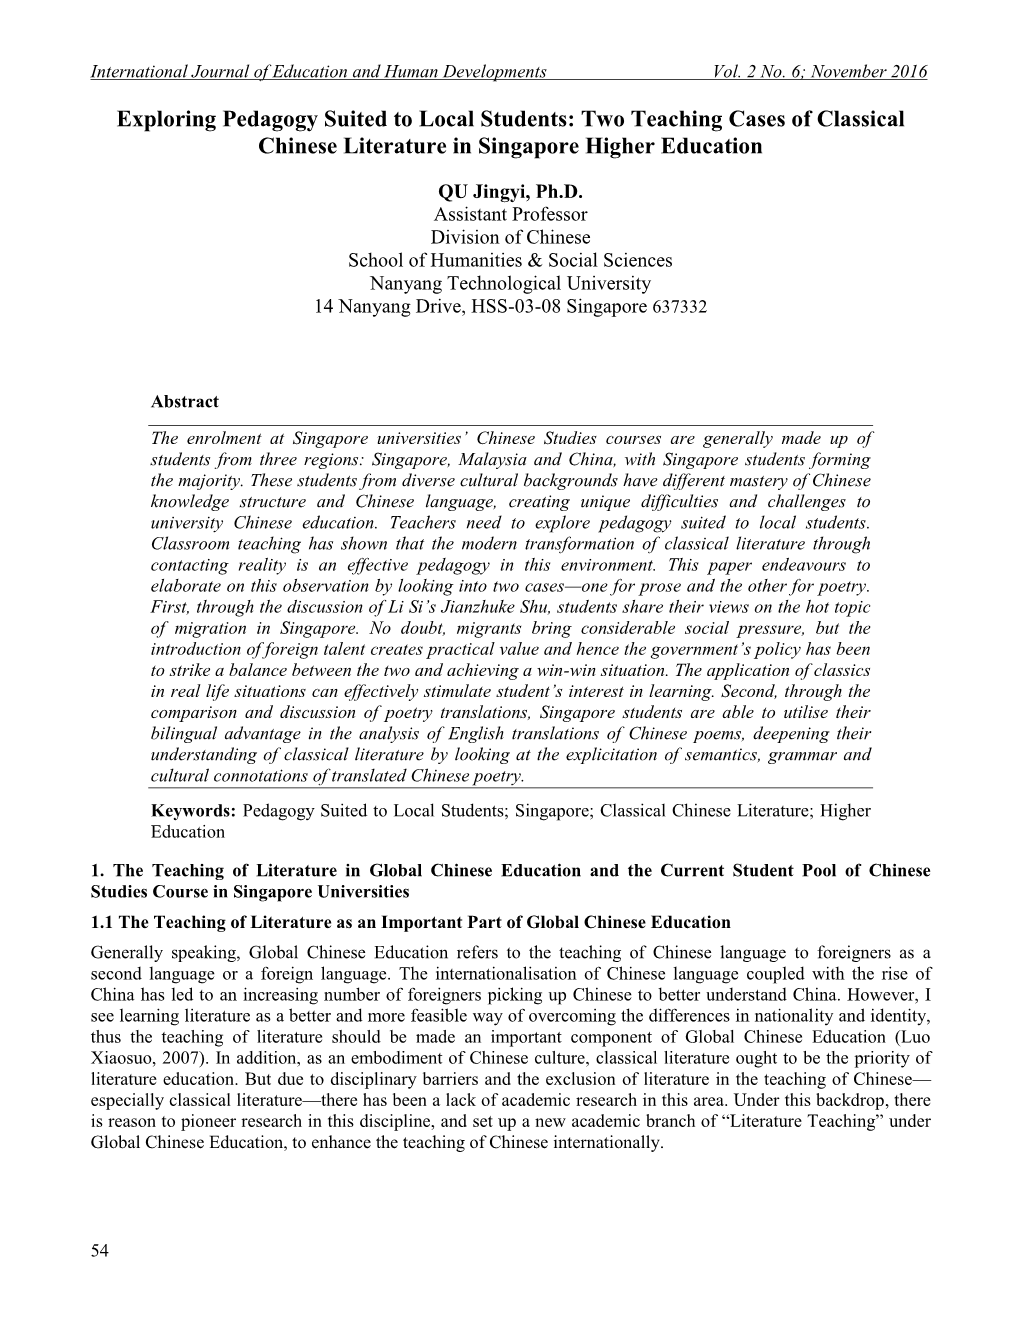 Exploring Pedagogy Suited to Local Students: Two Teaching Cases of Classical Chinese Literature in Singapore Higher Education